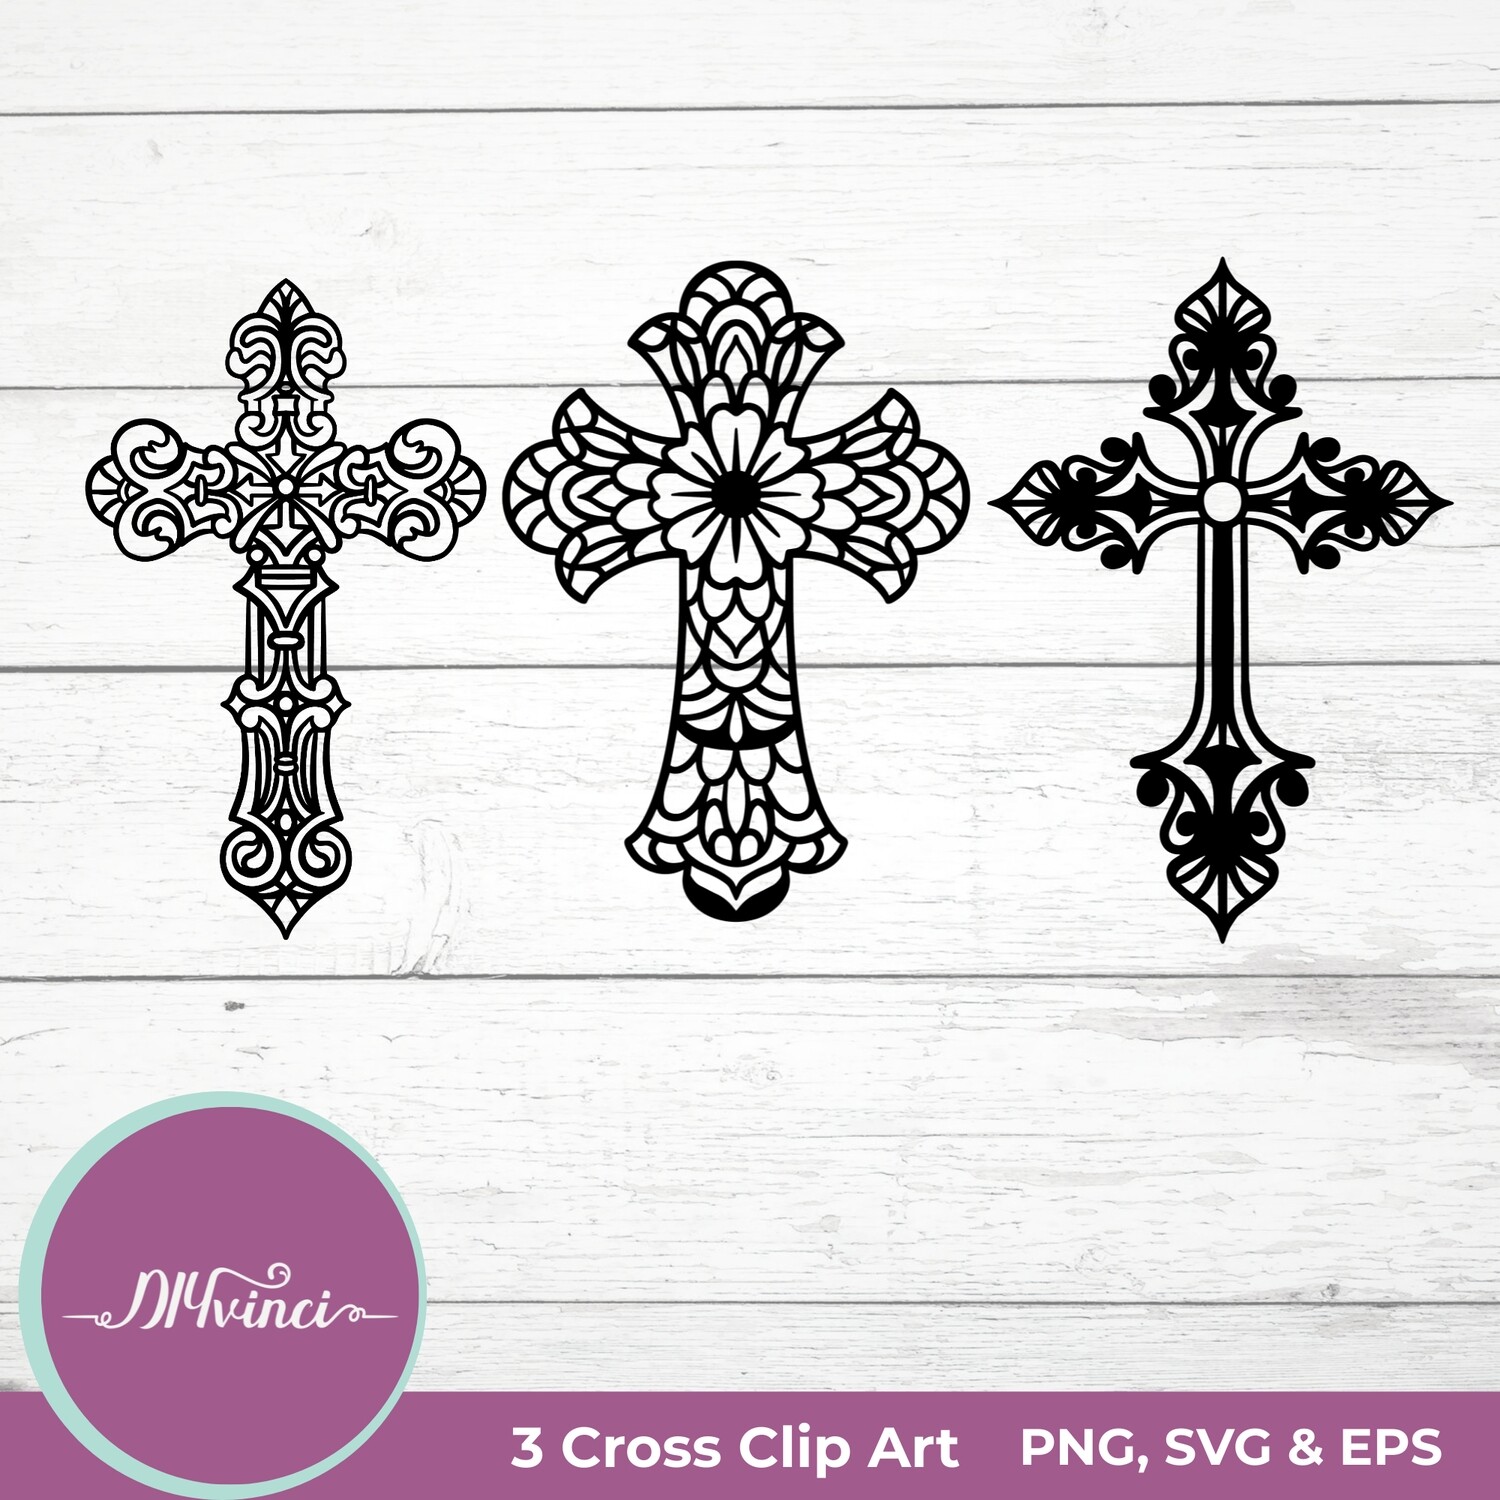 3 Cross Clip Art - PNG, SVG, EPS - Personal & Commercial Use